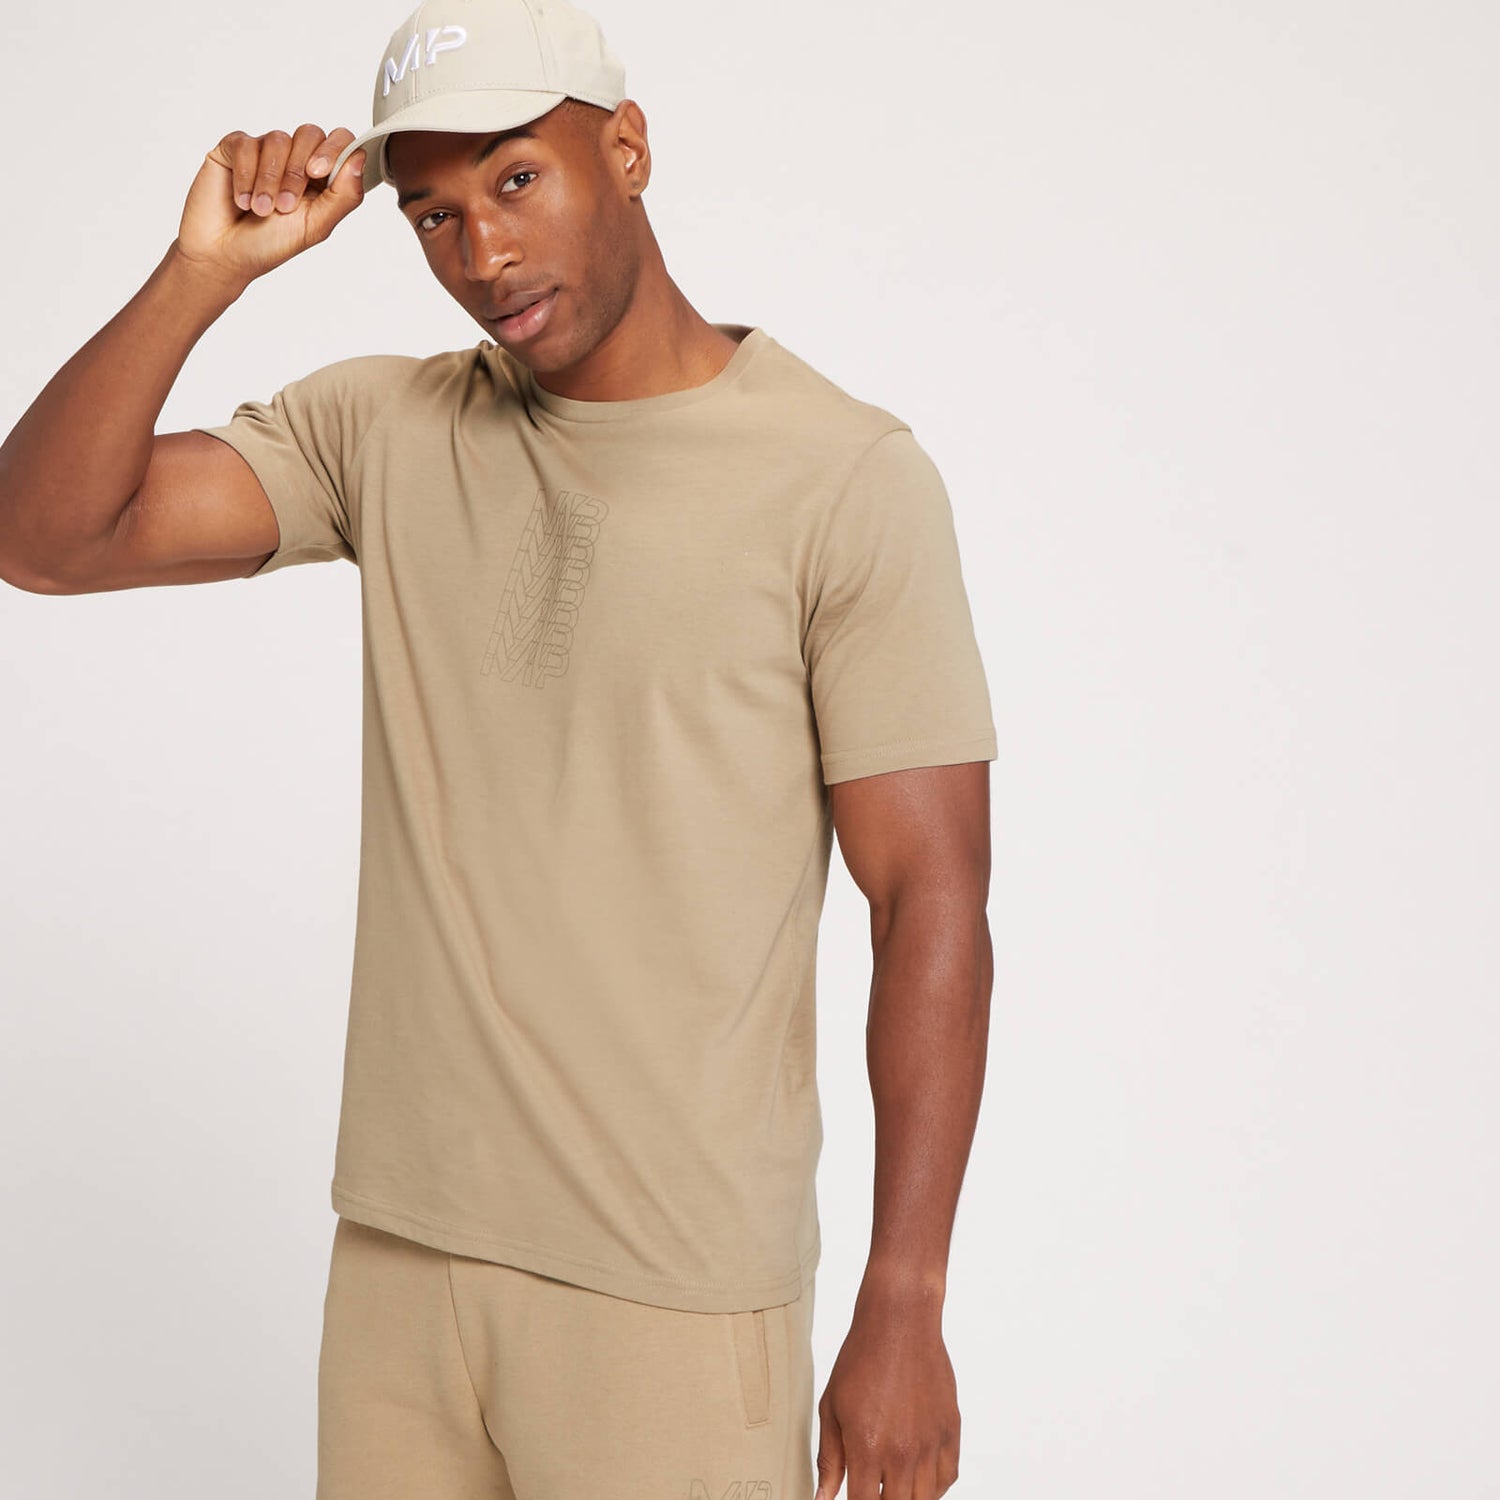 MP Repeat MP Graphic Short Sleeve T-Shirt til mænd – Taupe - XXS